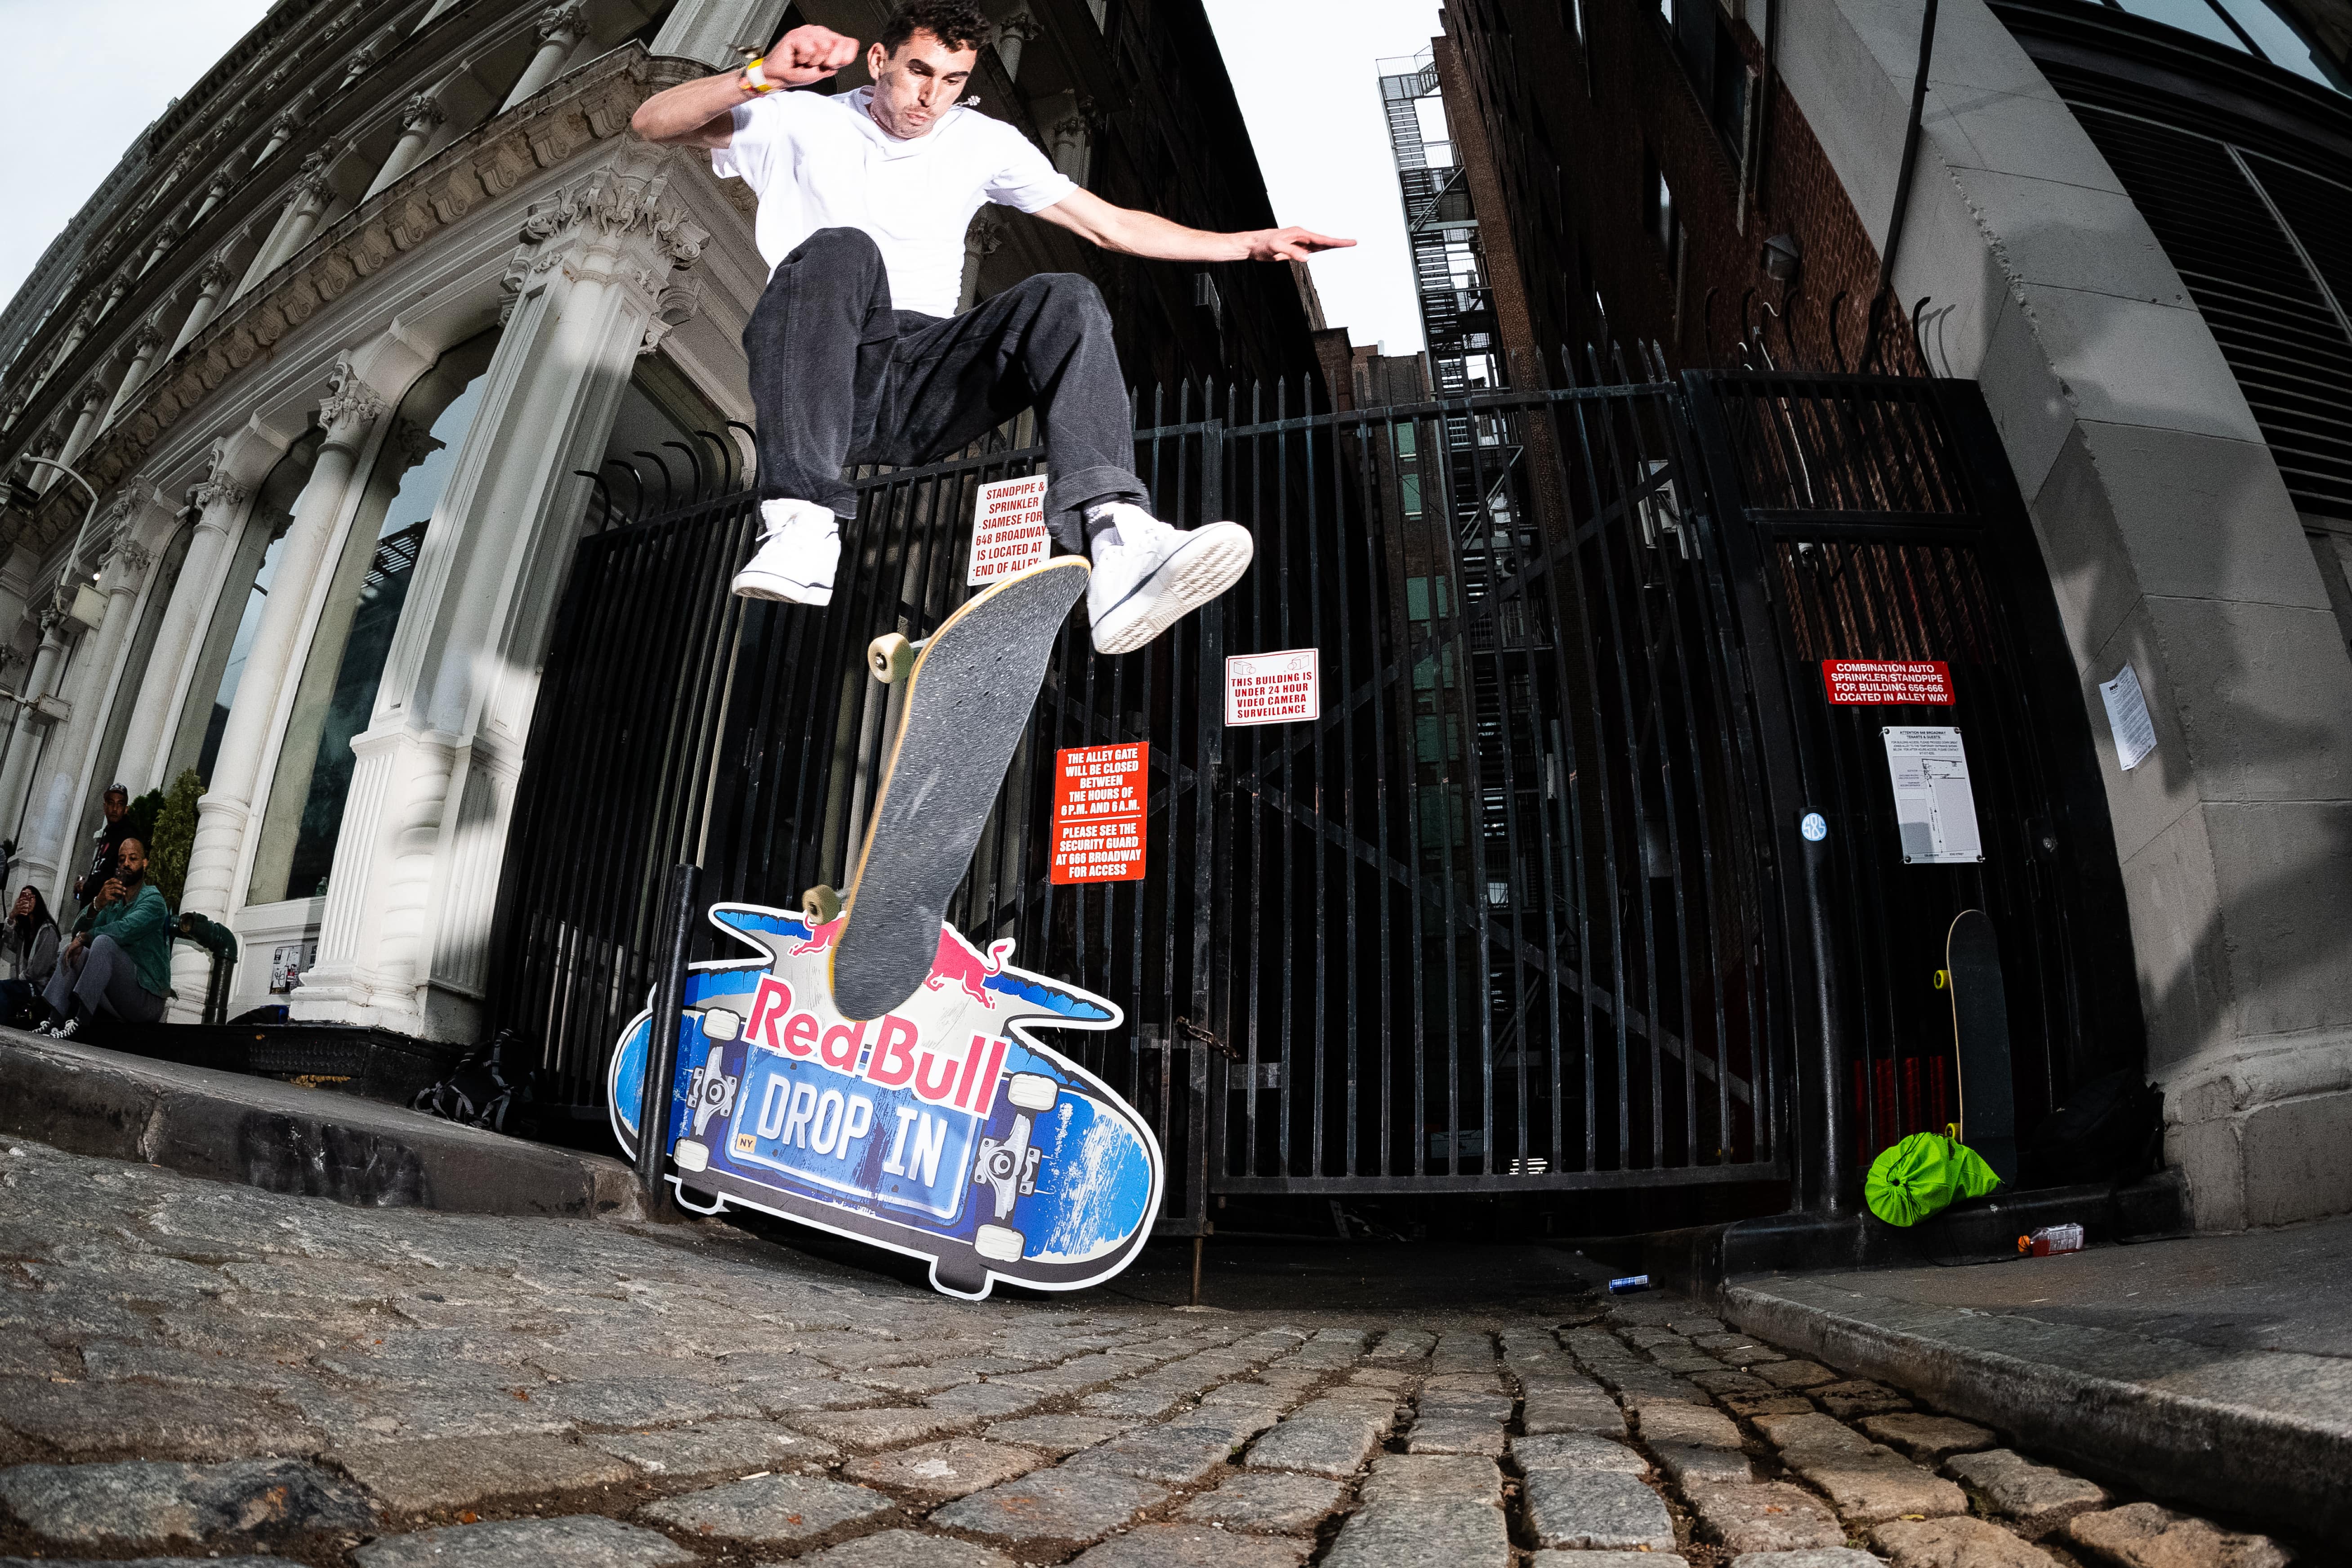 Red Bull Drop in Tour NYC - Frankie 360 Flip